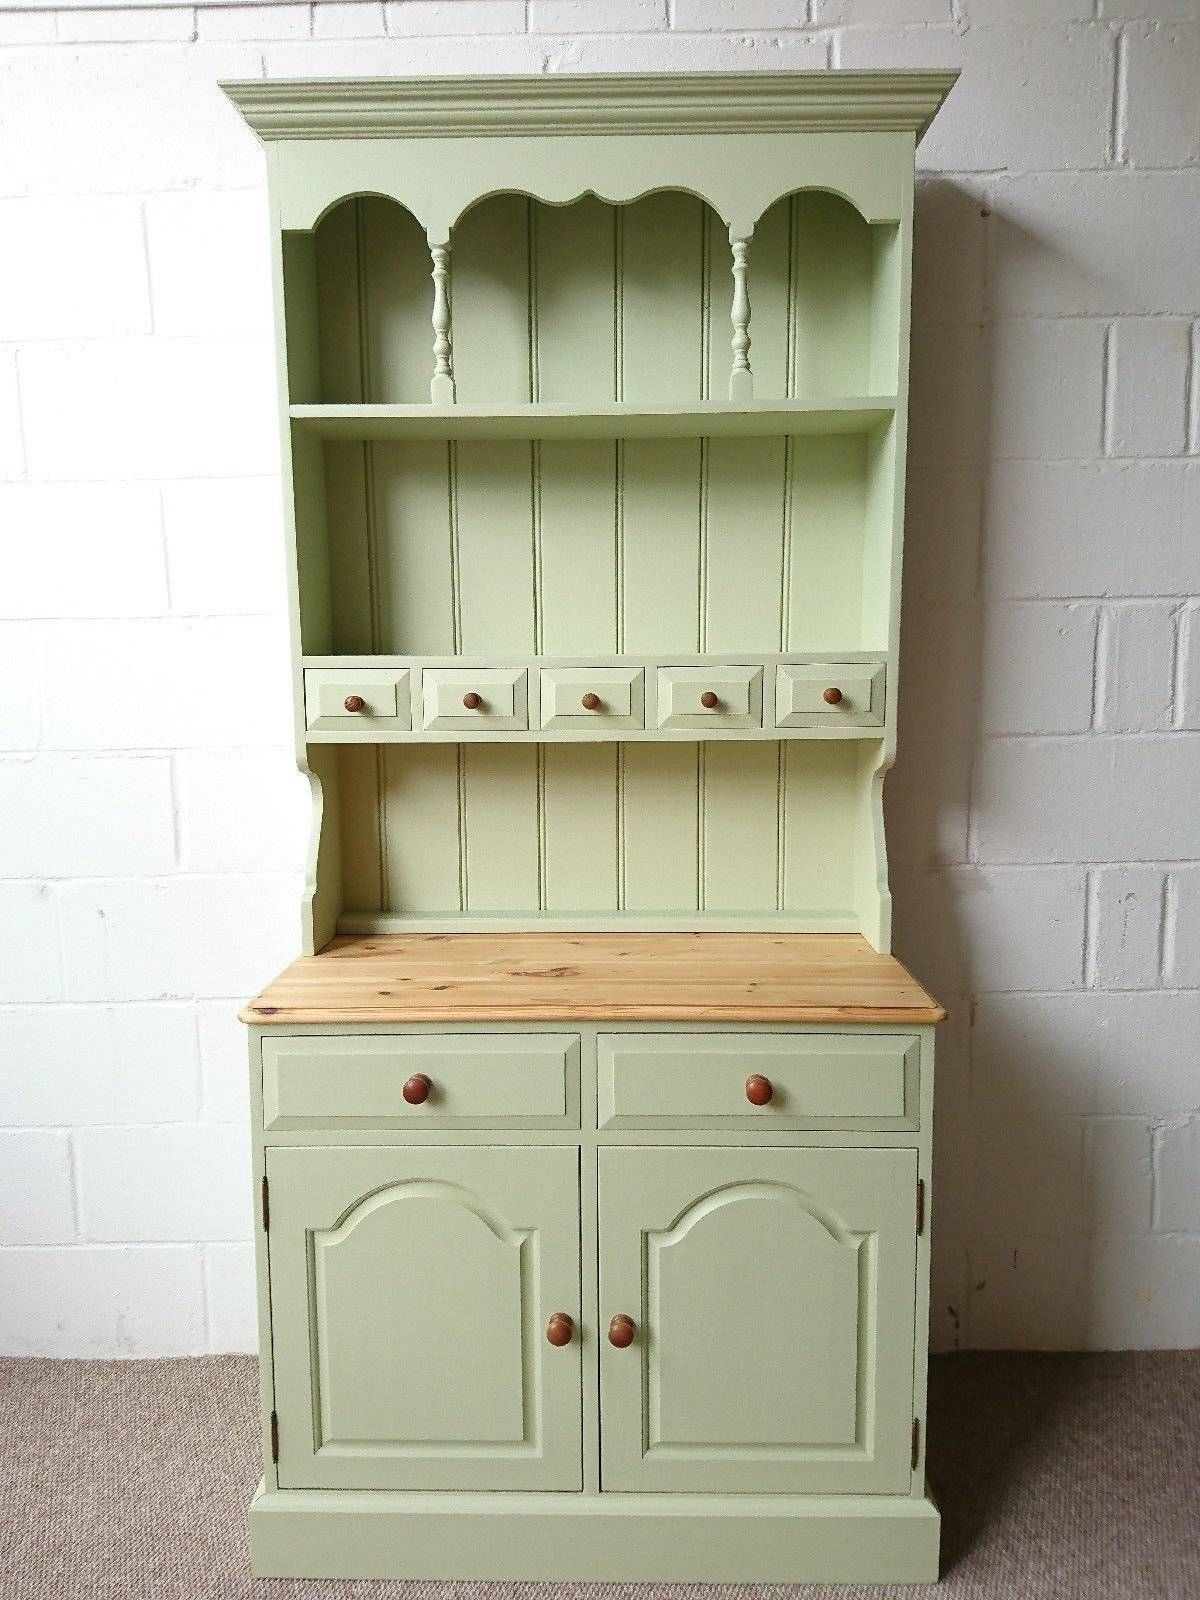 Small Kitchen Welsh Dresser In Farrow & Ball Cooking Apple Green Throughout 2018 Kitchen Dressers And Sideboards (View 8 of 15)